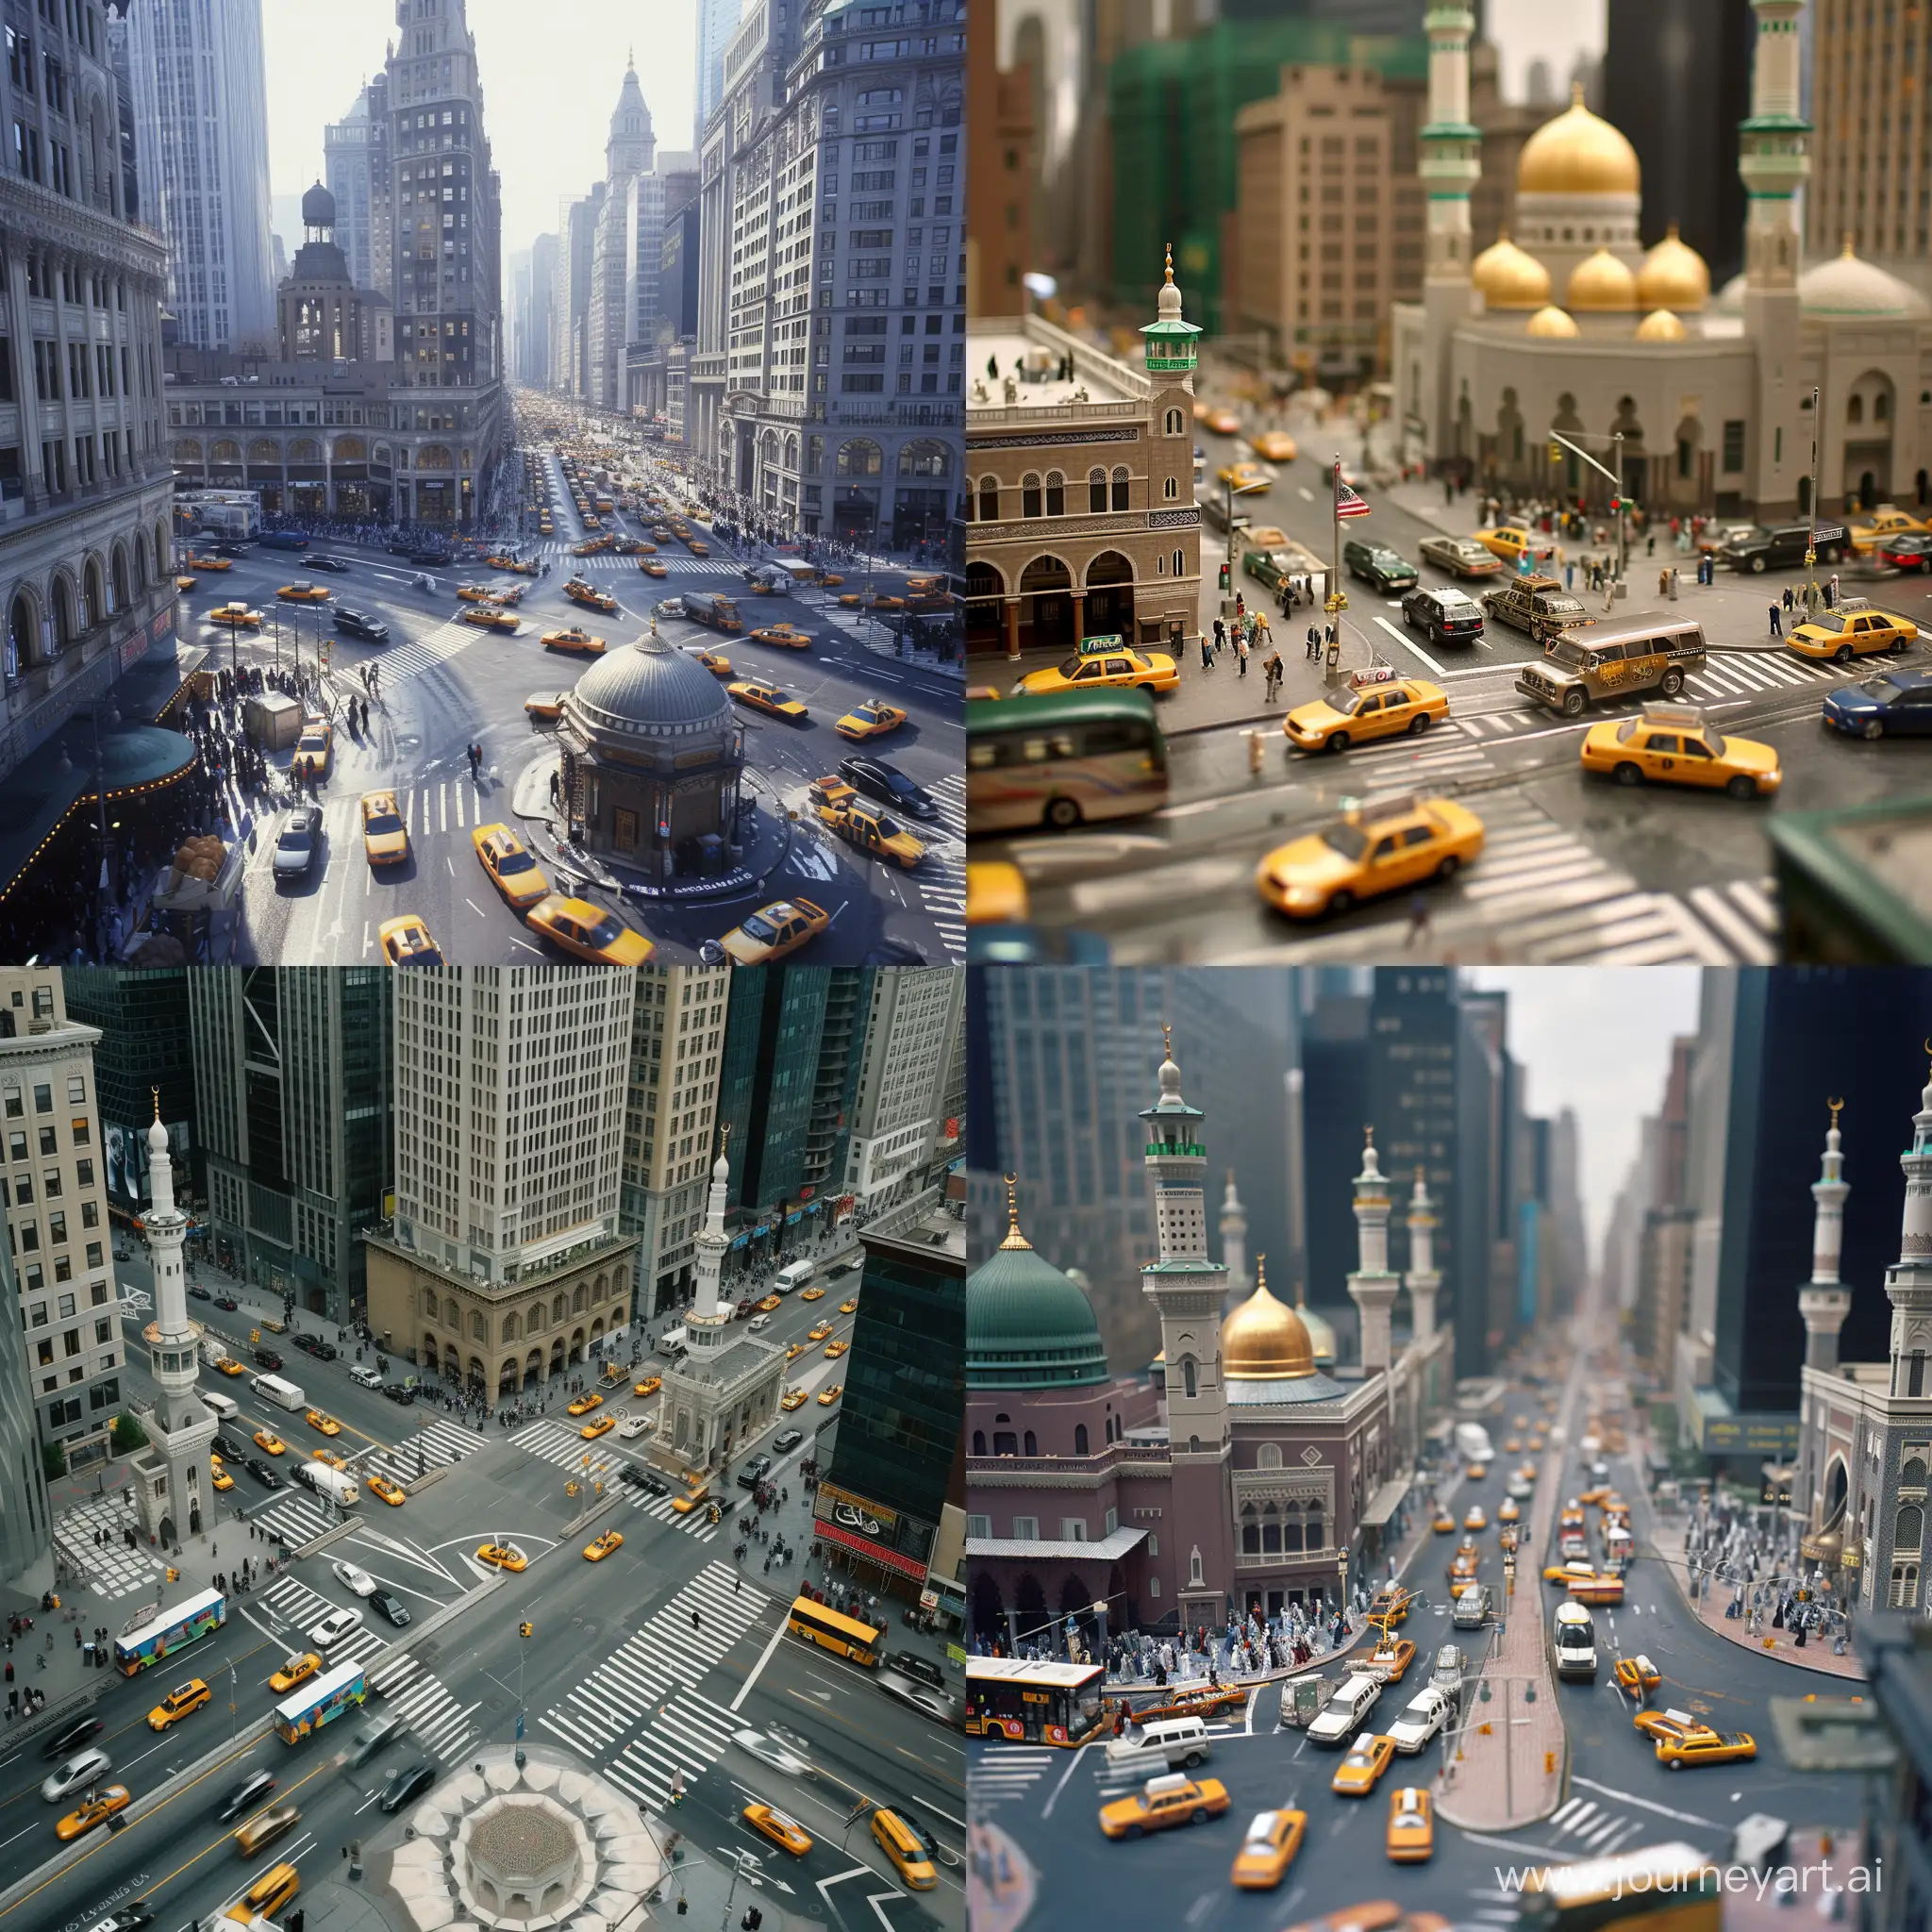 a street intersection with Newyork traffic, full of  Mecca mosque architectures 